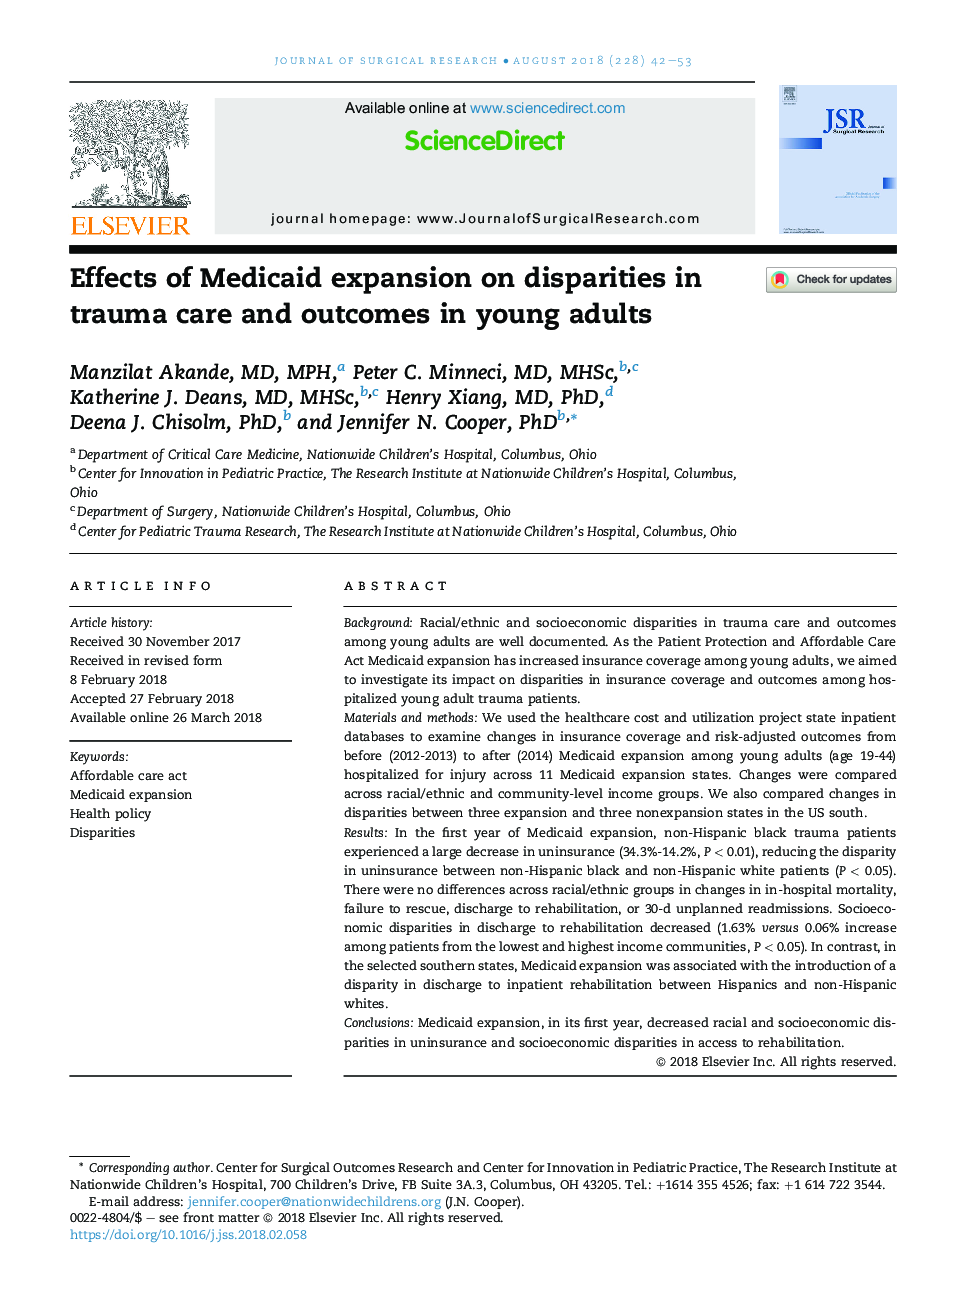 Effects of Medicaid expansion on disparities in trauma care and outcomes in young adults